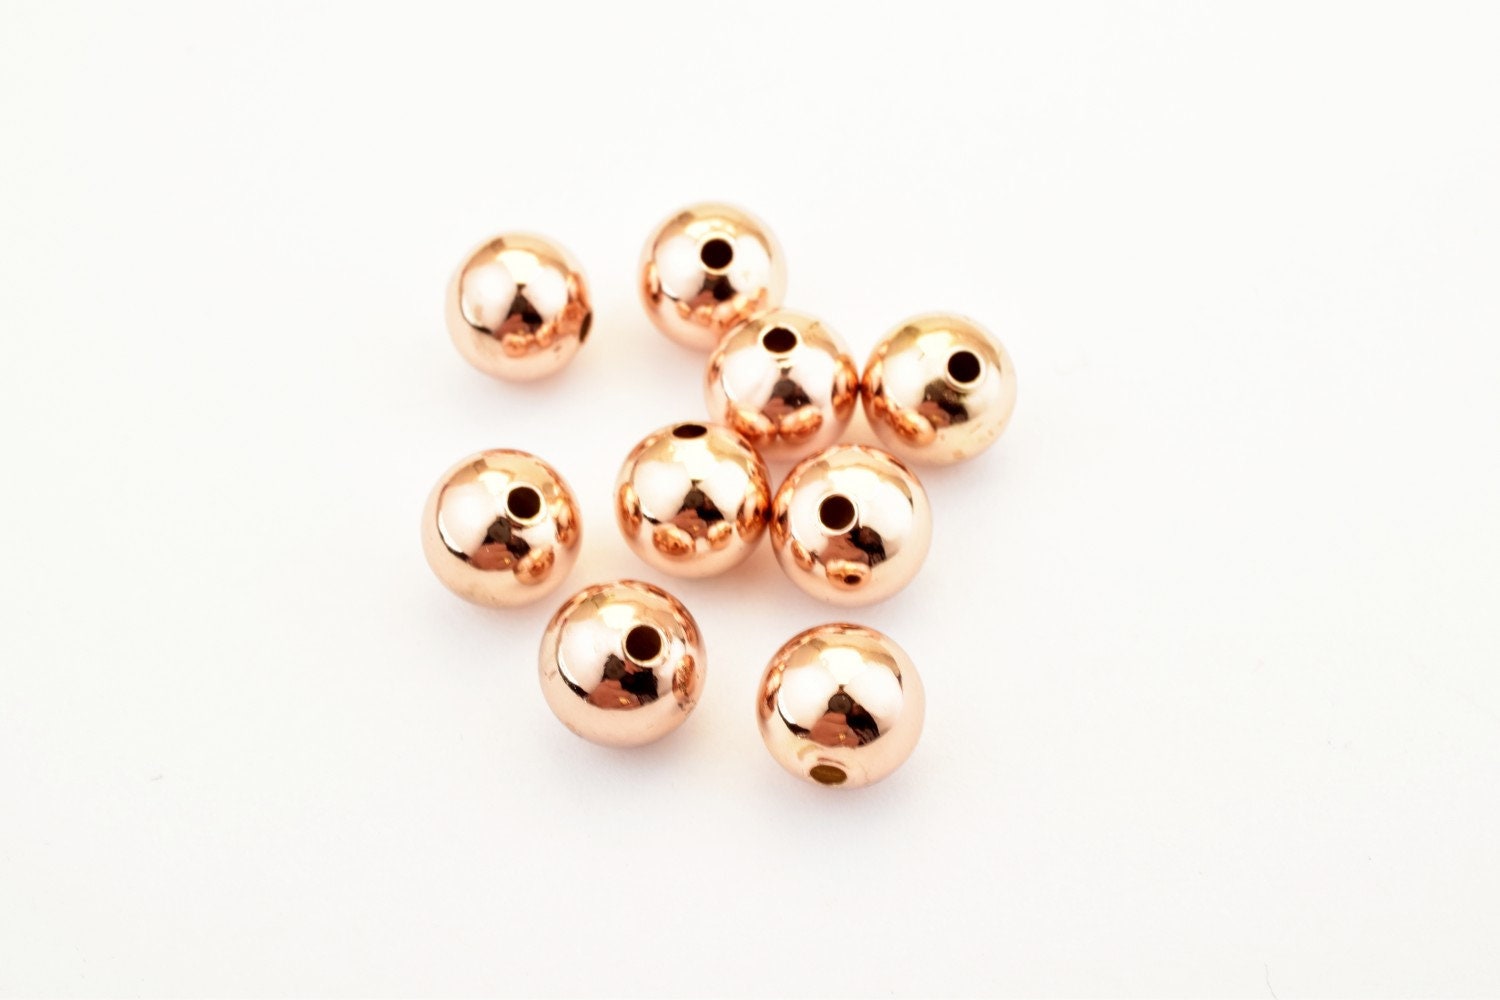 Elegant 18K Rose Gold Filled Ball Beads - Versatile Sizes for Jewelry Making, High-Quality, Skin-Friendly Beads, Perfect for DIY Projects BeadsFindingDepot